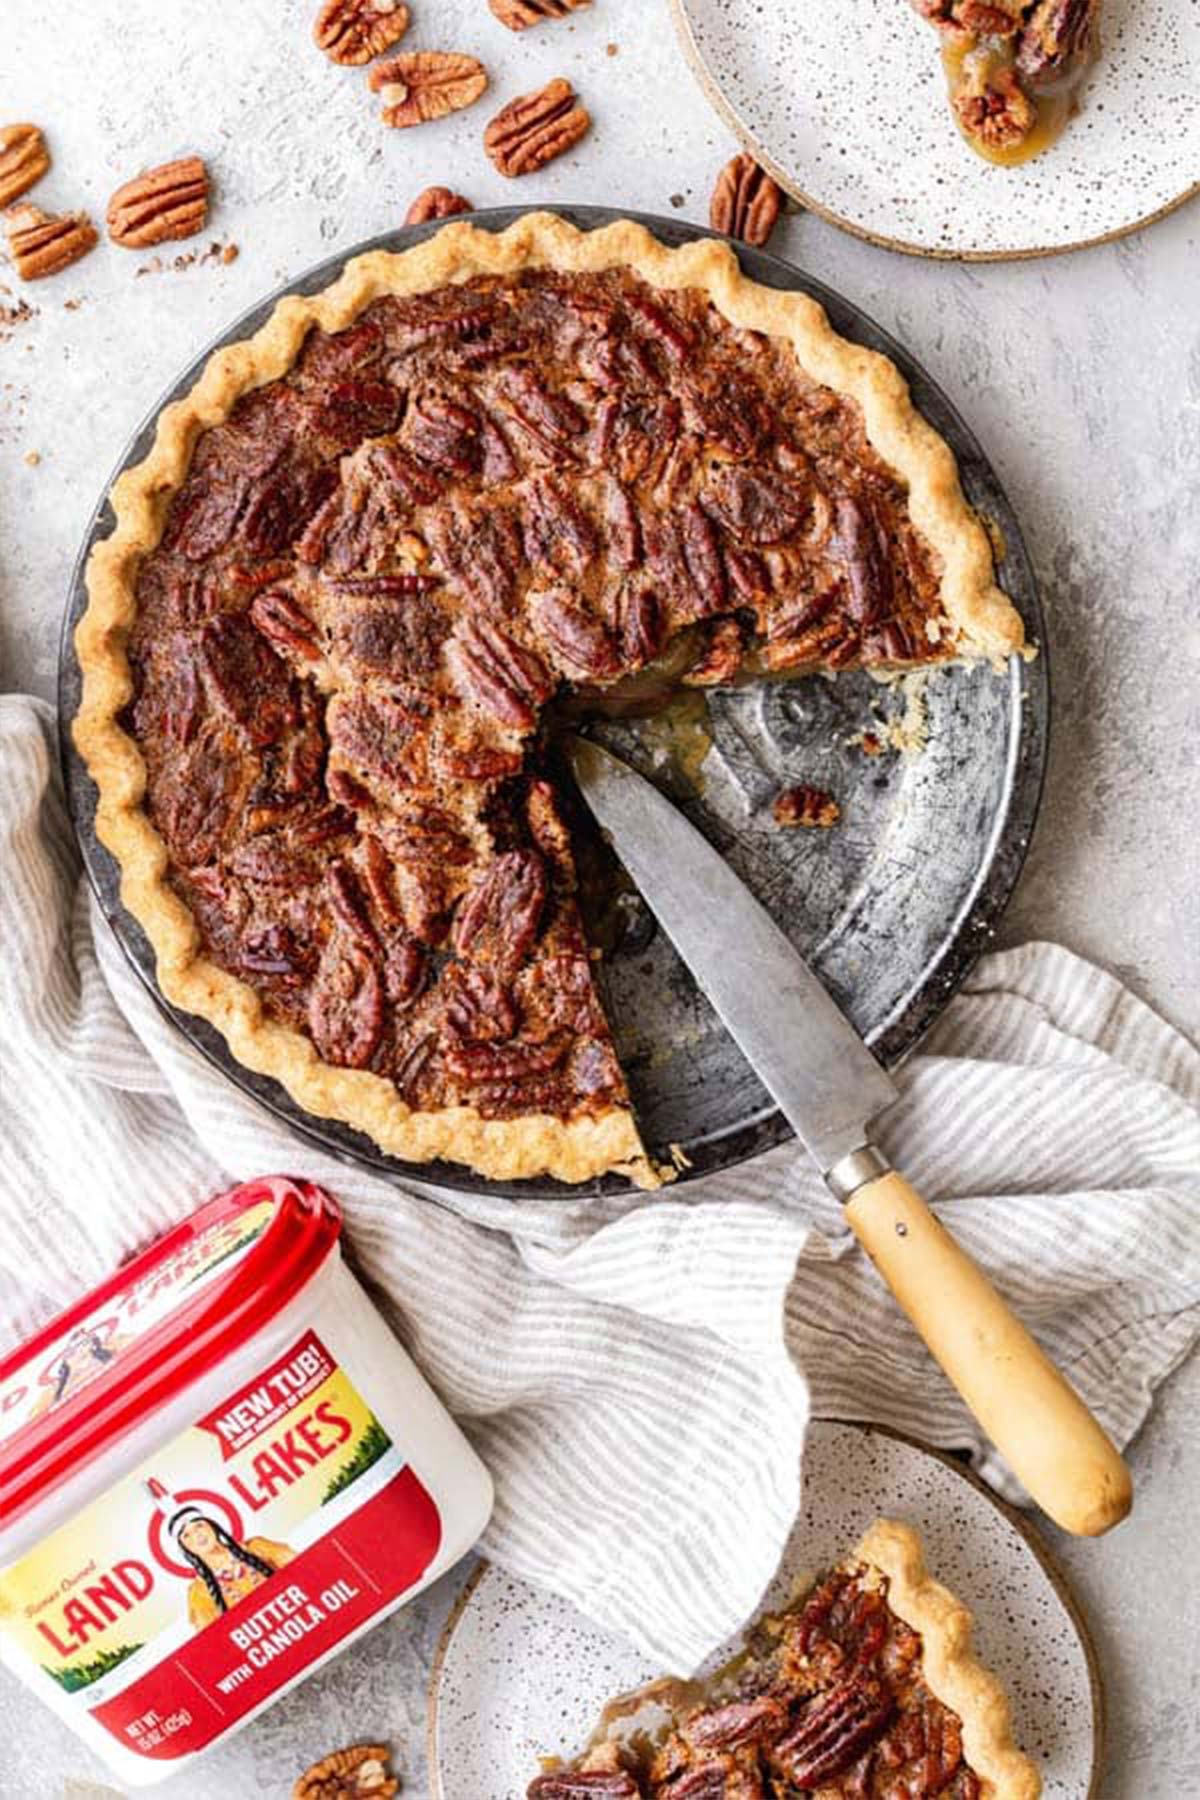 A half pecan pie recipe agains white background with butter